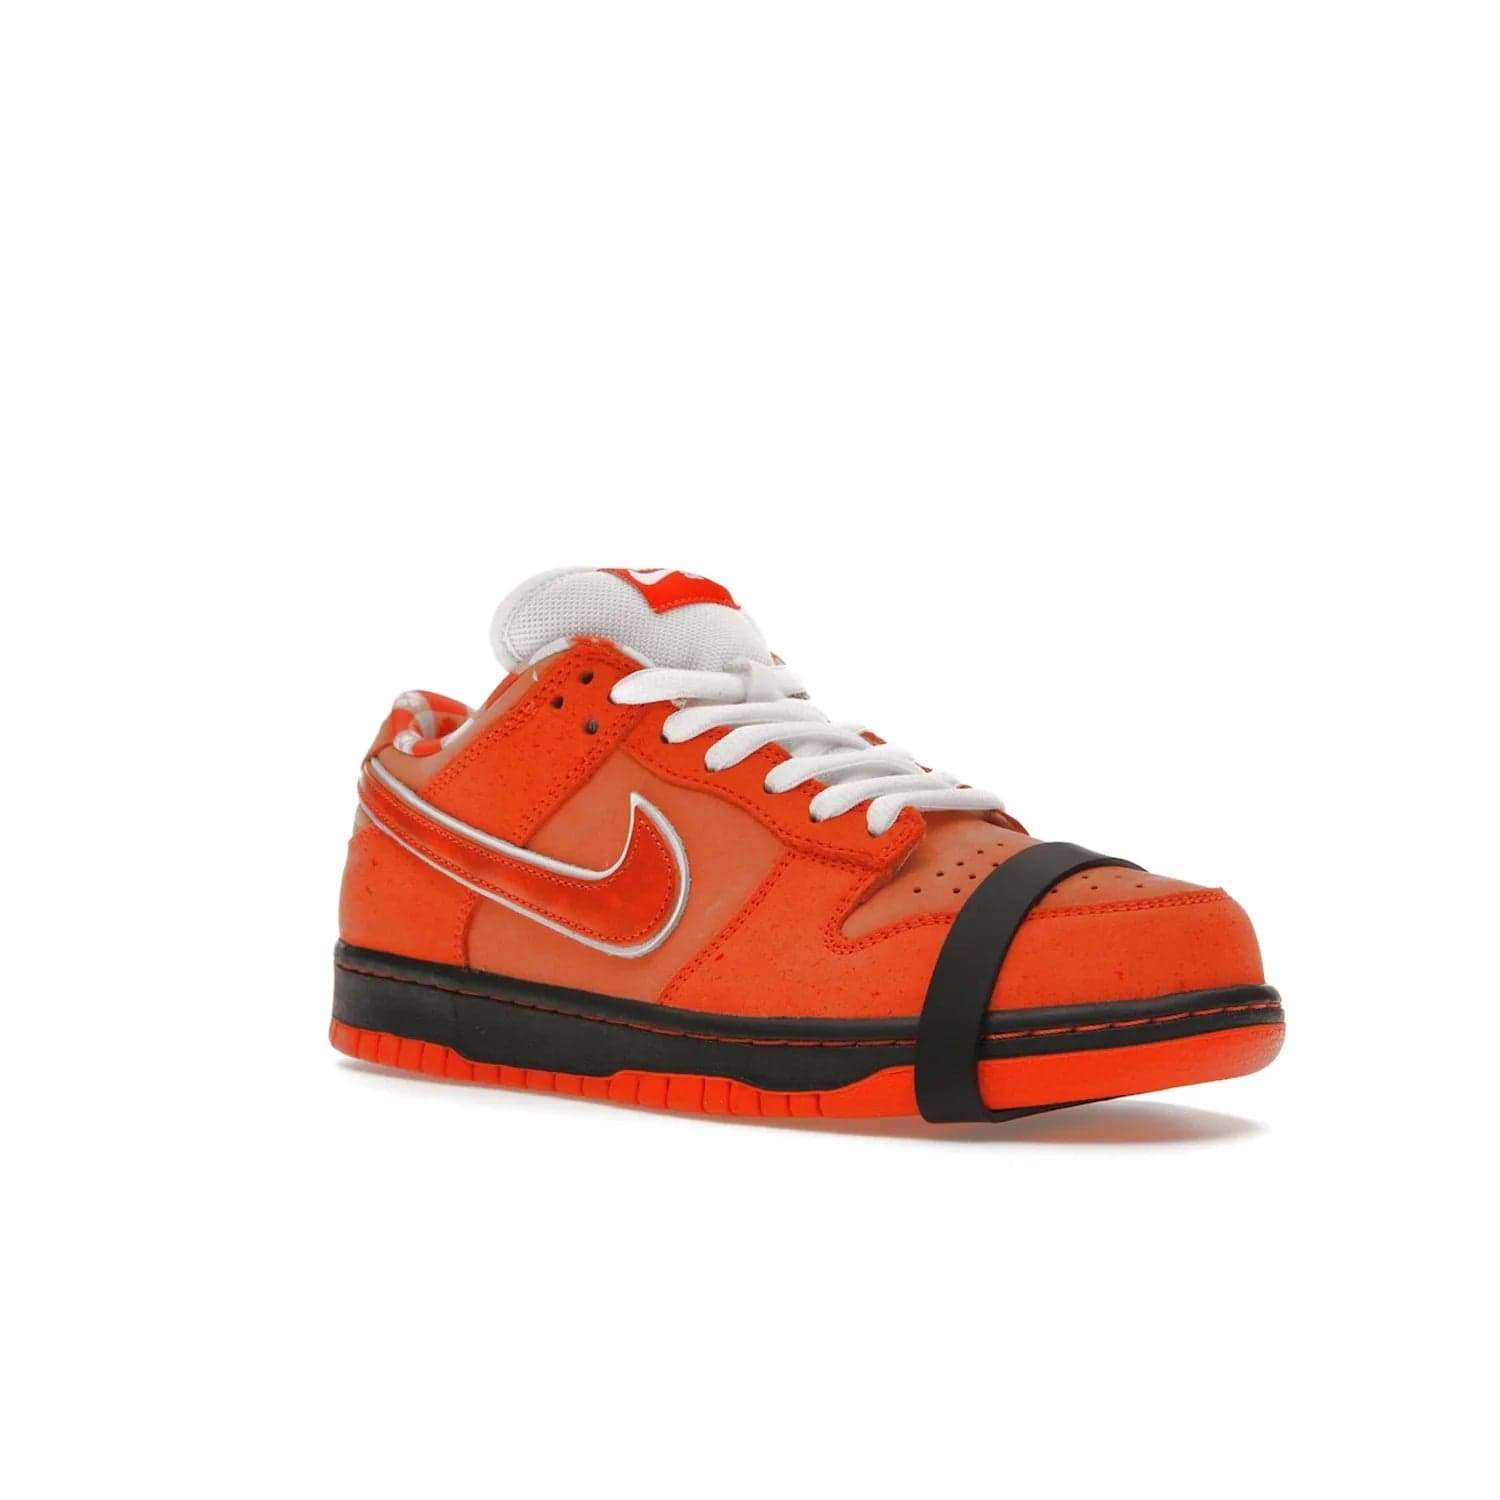 Nike SB Dunk Low Concepts Orange Lobster - Image 5 - Only at www.BallersClubKickz.com - Limited Nike SB Dunk Low Concepts Orange Lobster features premium nubuck upper with vibrant oranges for eye-catching colorblocked design. Signature Nike SB tag and bib-inspired interior for added texture. Outsole and cupsole provide extra reinforcement. Get it 12/20/2022.